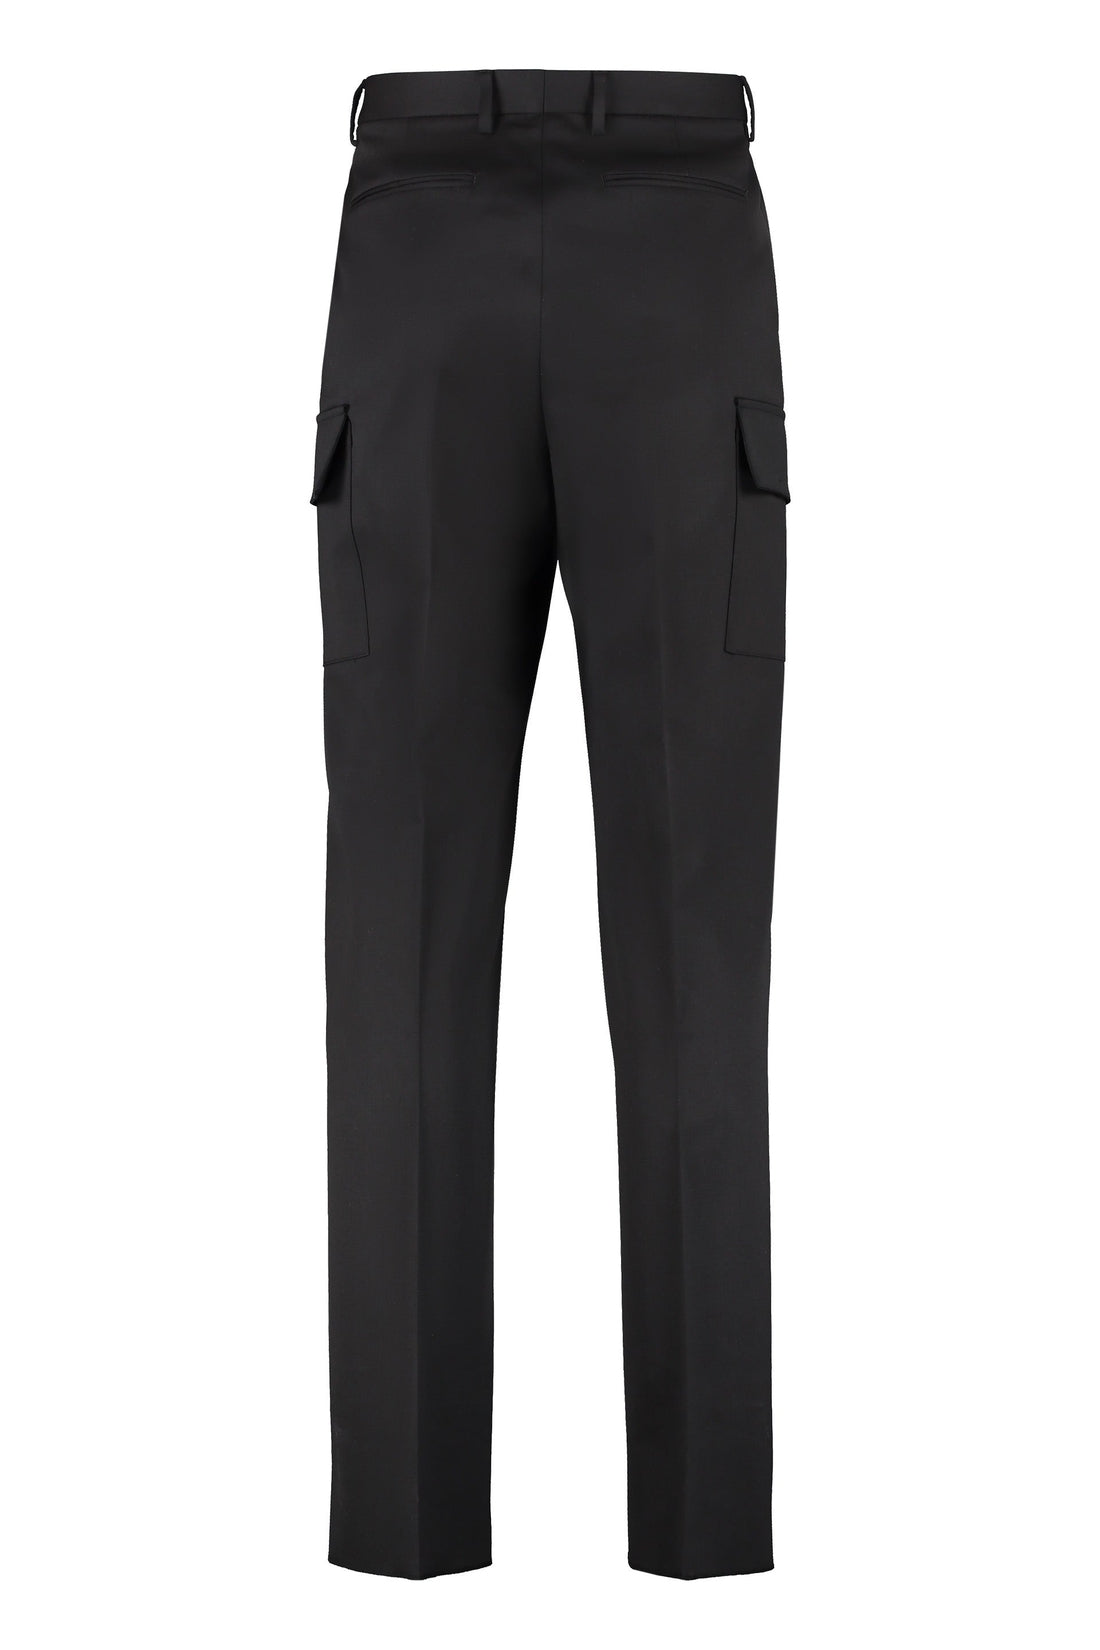 Valentino-OUTLET-SALE-Wool cargo trousers-ARCHIVIST